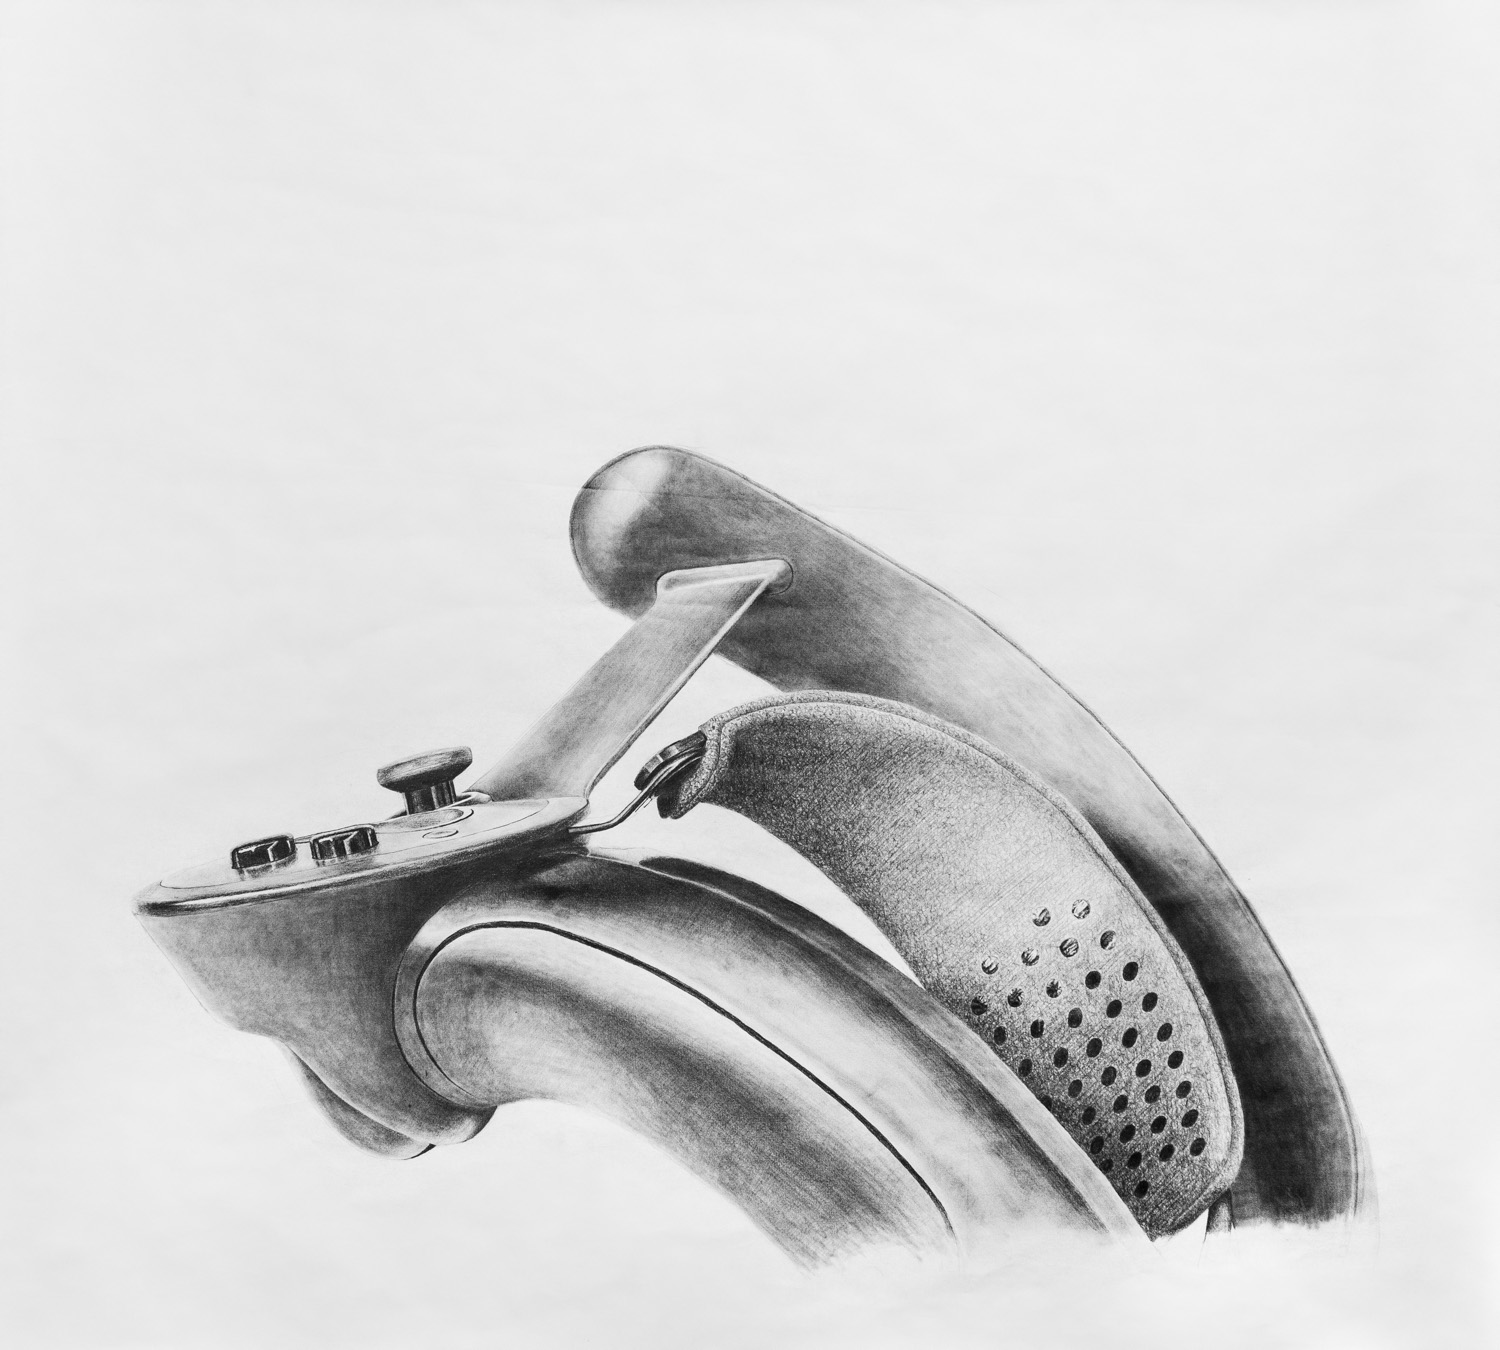 Large charcoal drawing of the right Valve Index Controller.